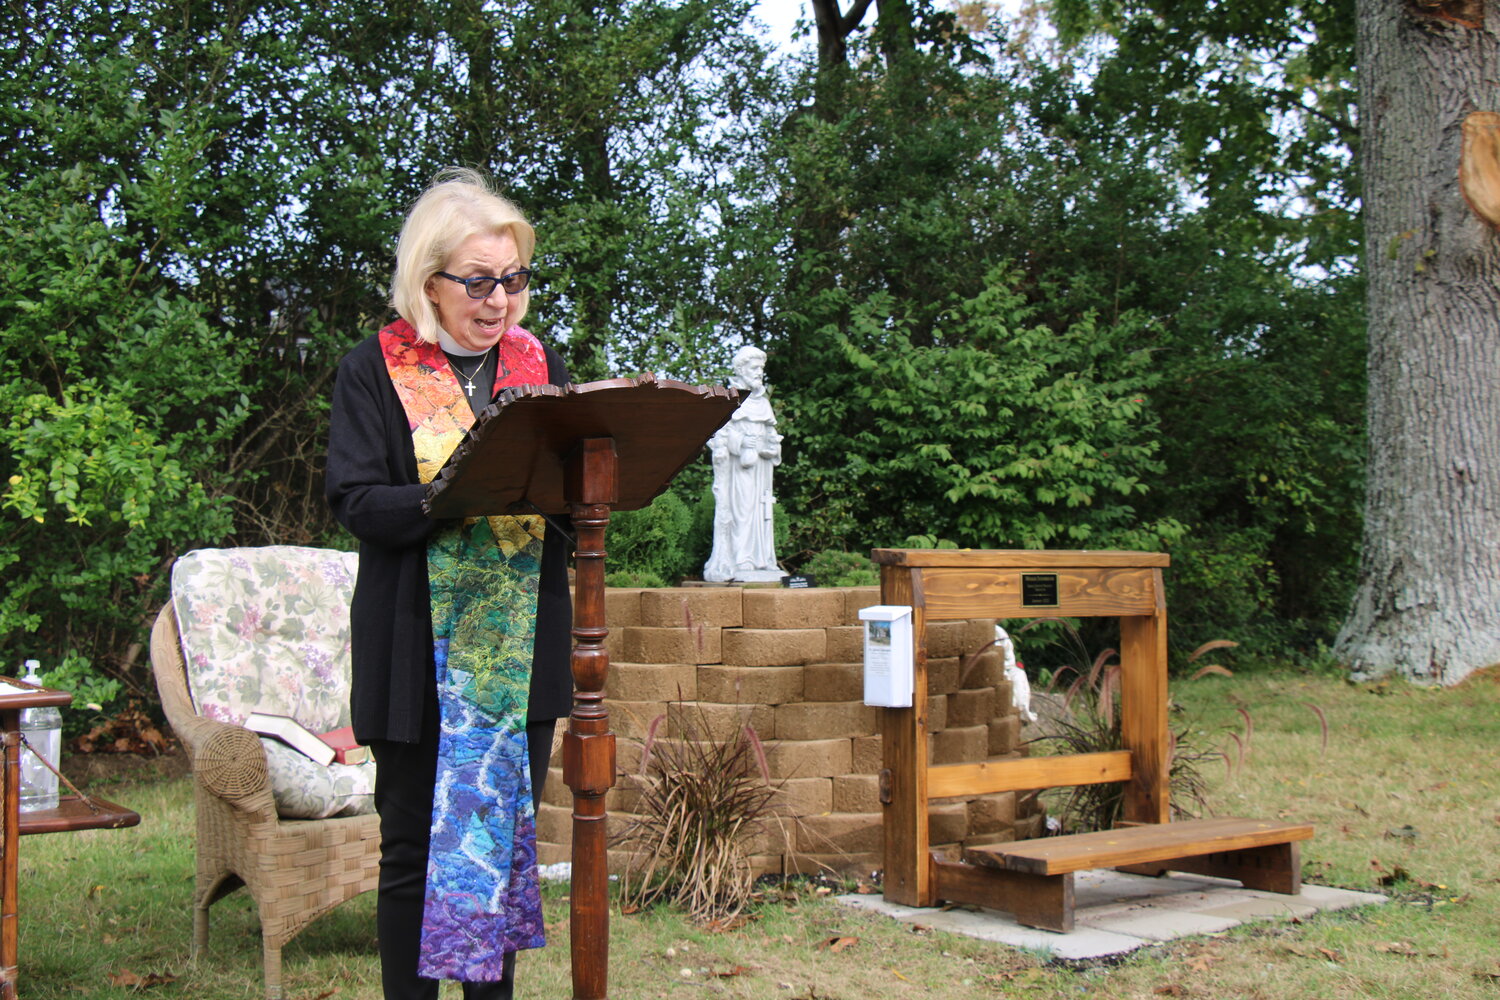 Mother Bernadette addressed the congregants, both two- and four-legged, about the importance of genuflecting to nature to achieve spirituality.